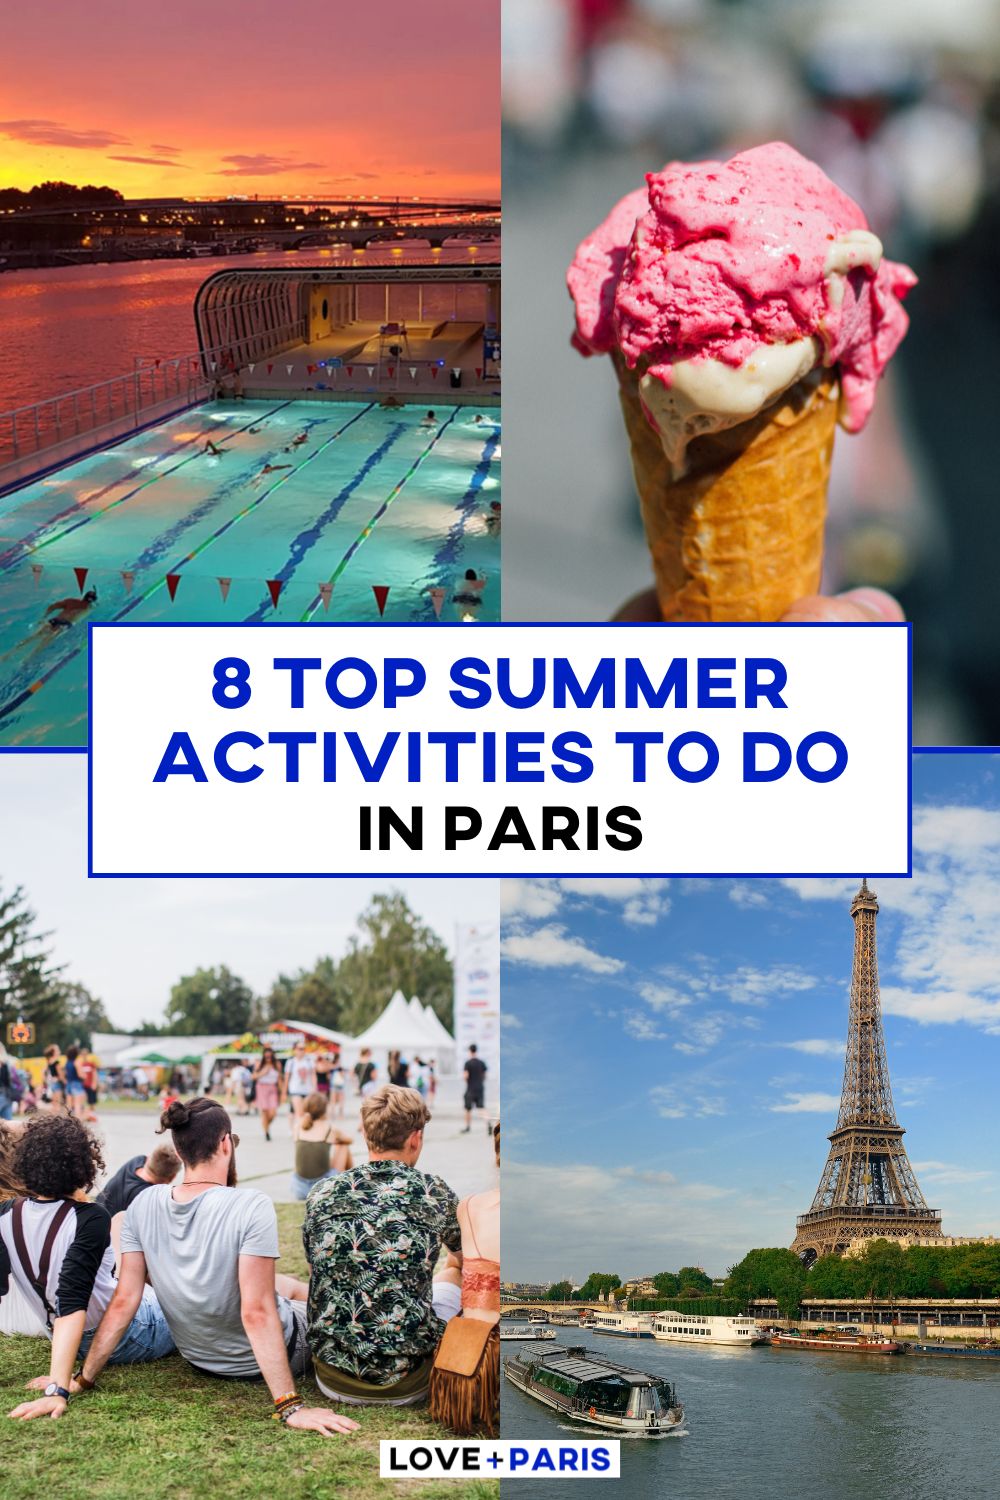 This is a Pinterest pin detailing the 8 Top Summer Activities to do in Paris.